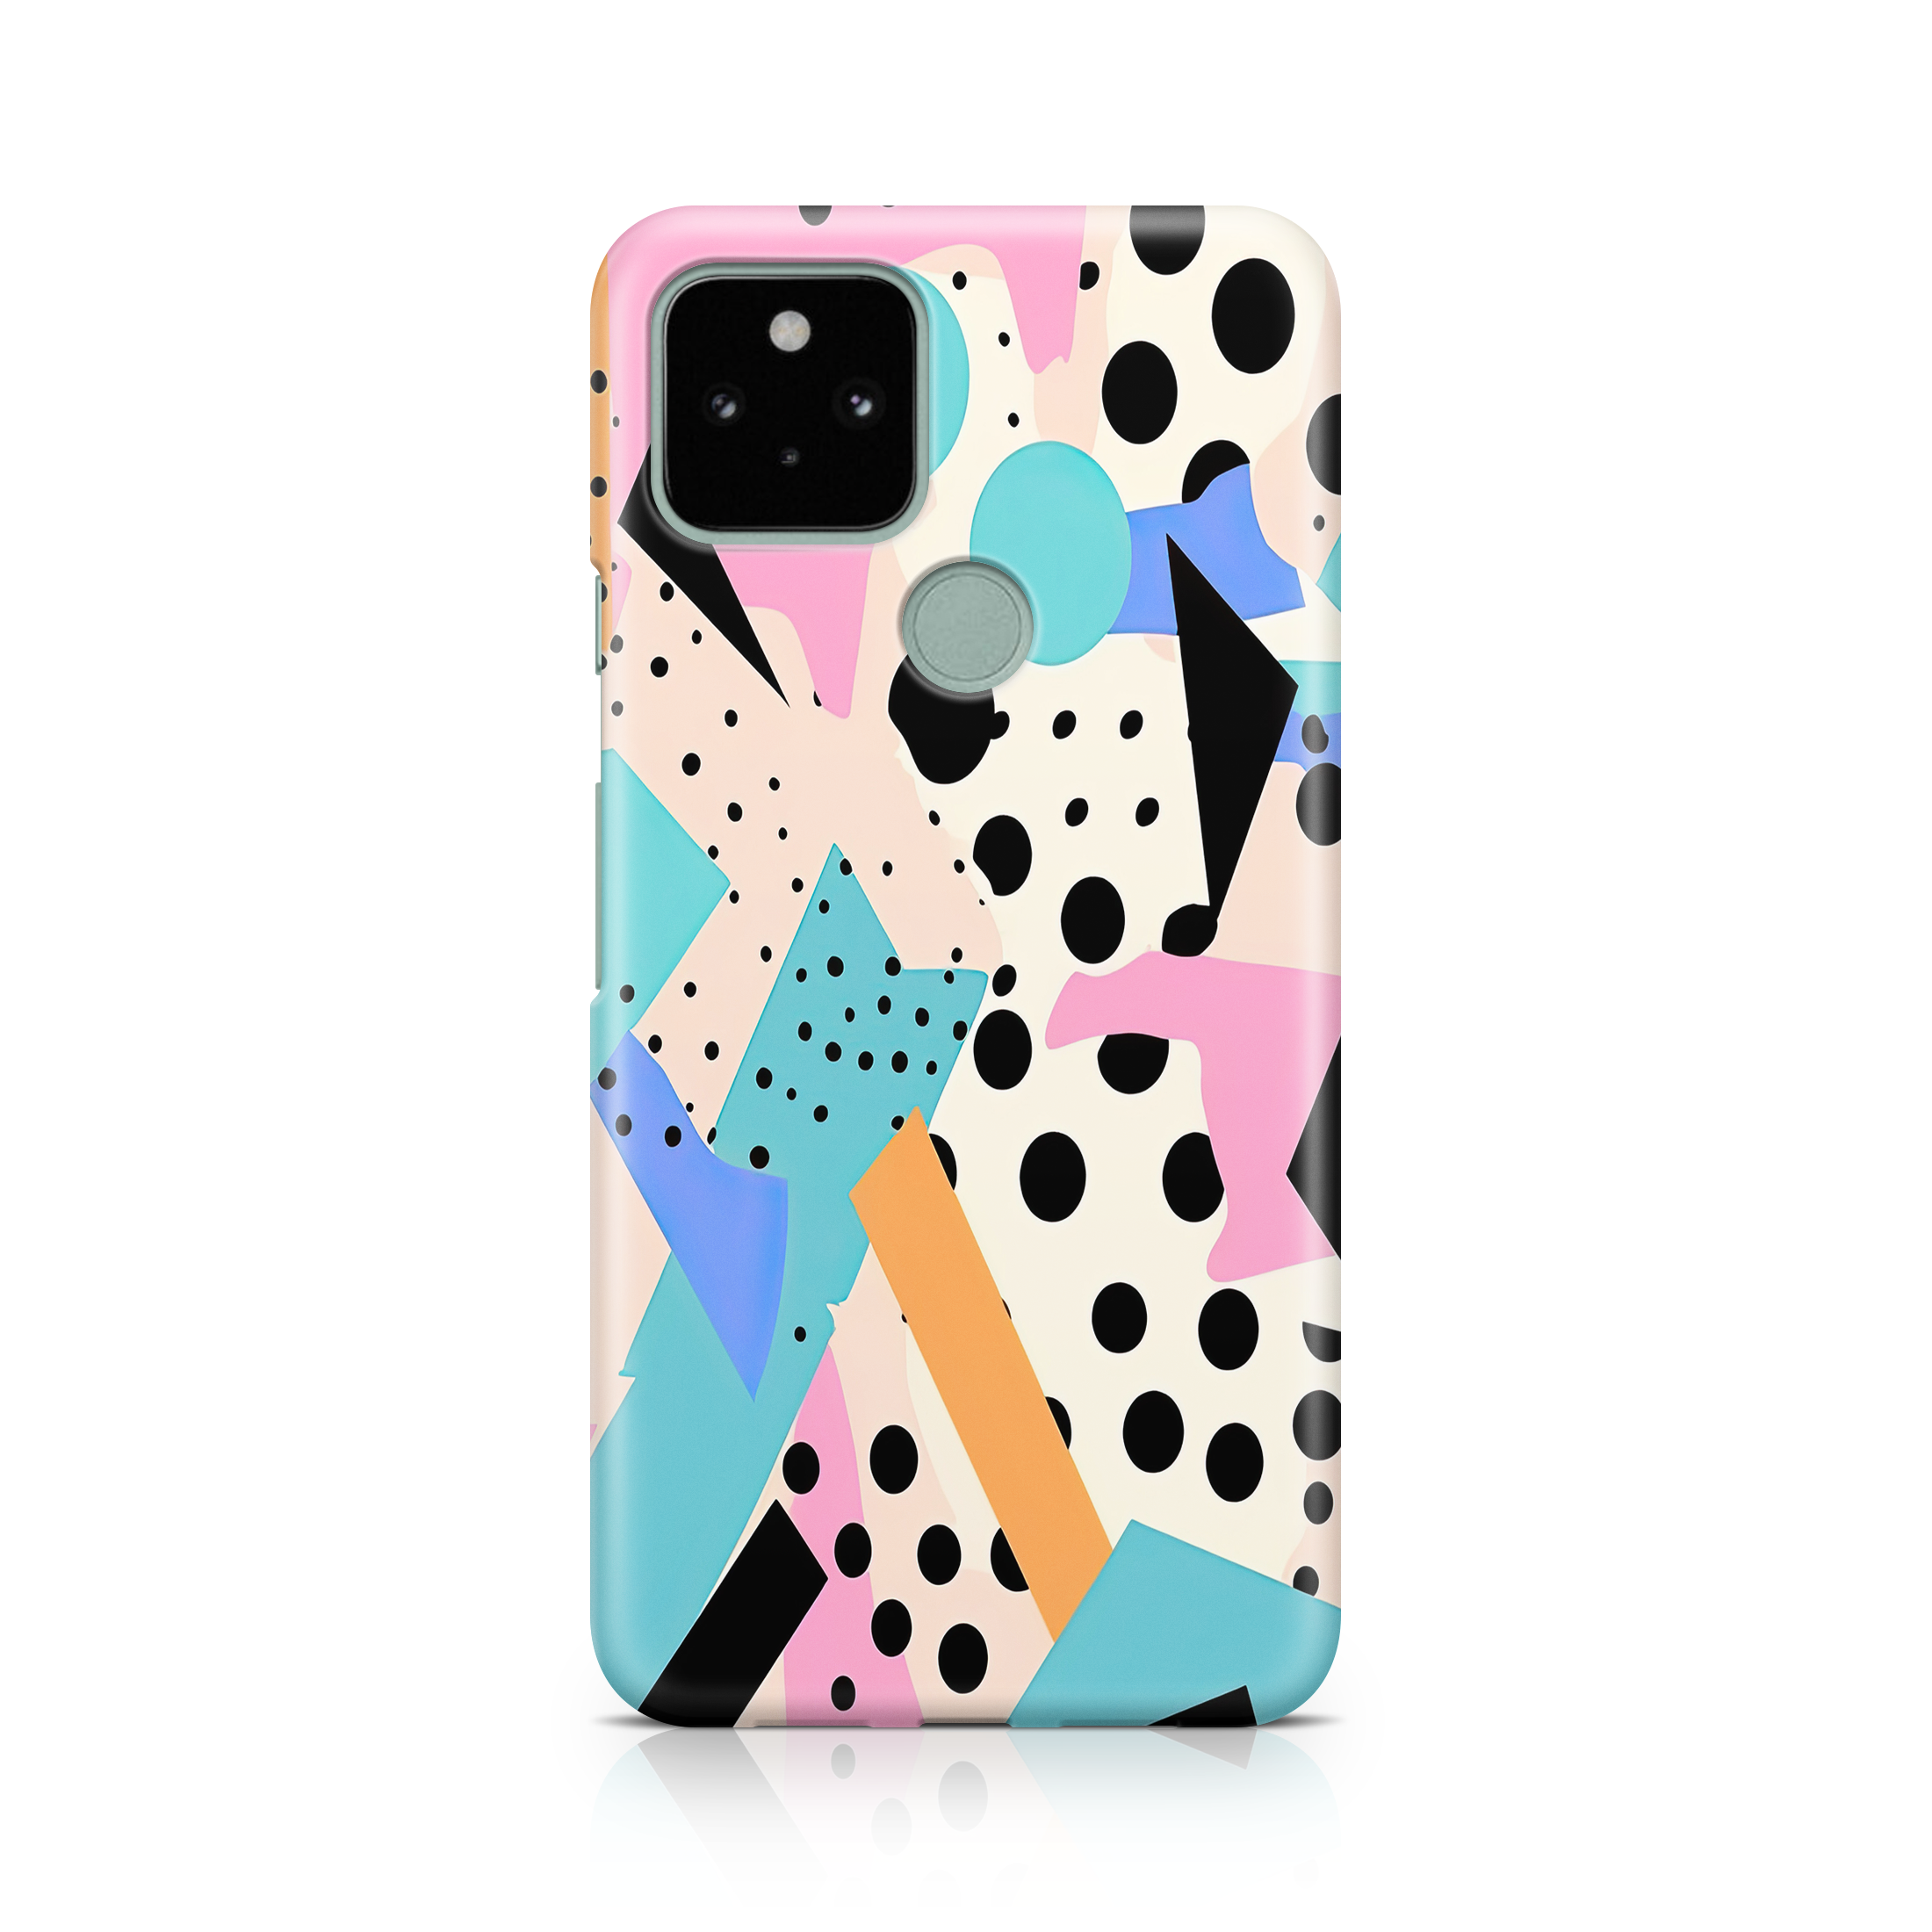 Meadow Melodies - Google phone case designs by CaseSwagger